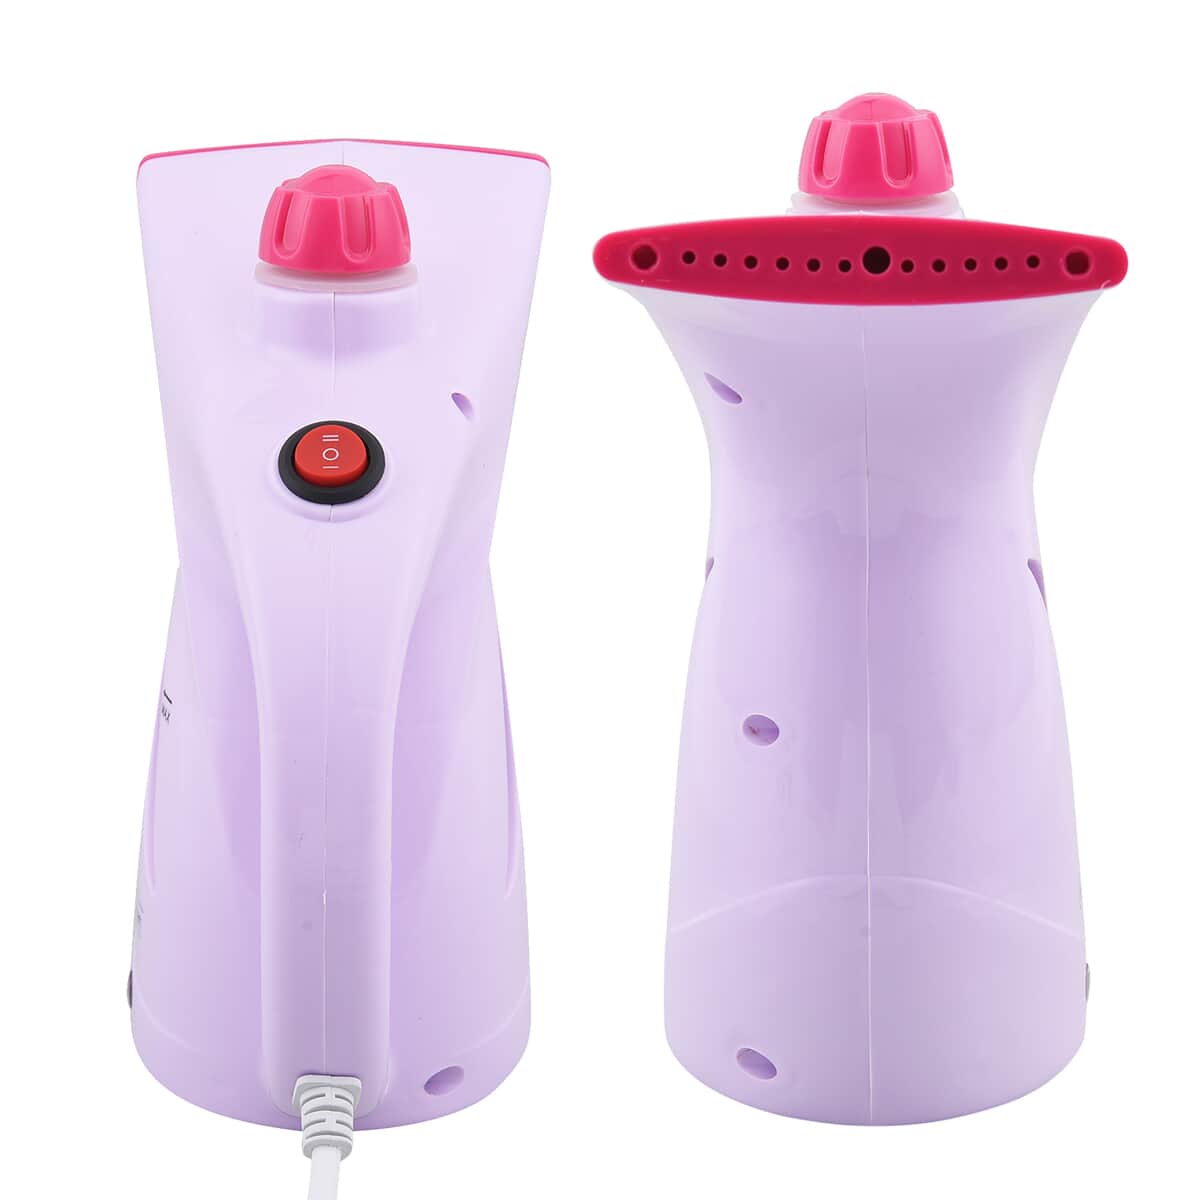 Homesmart Pink Garment Steamer with Water Tank, Brush and Electrostatic Brush image number 4